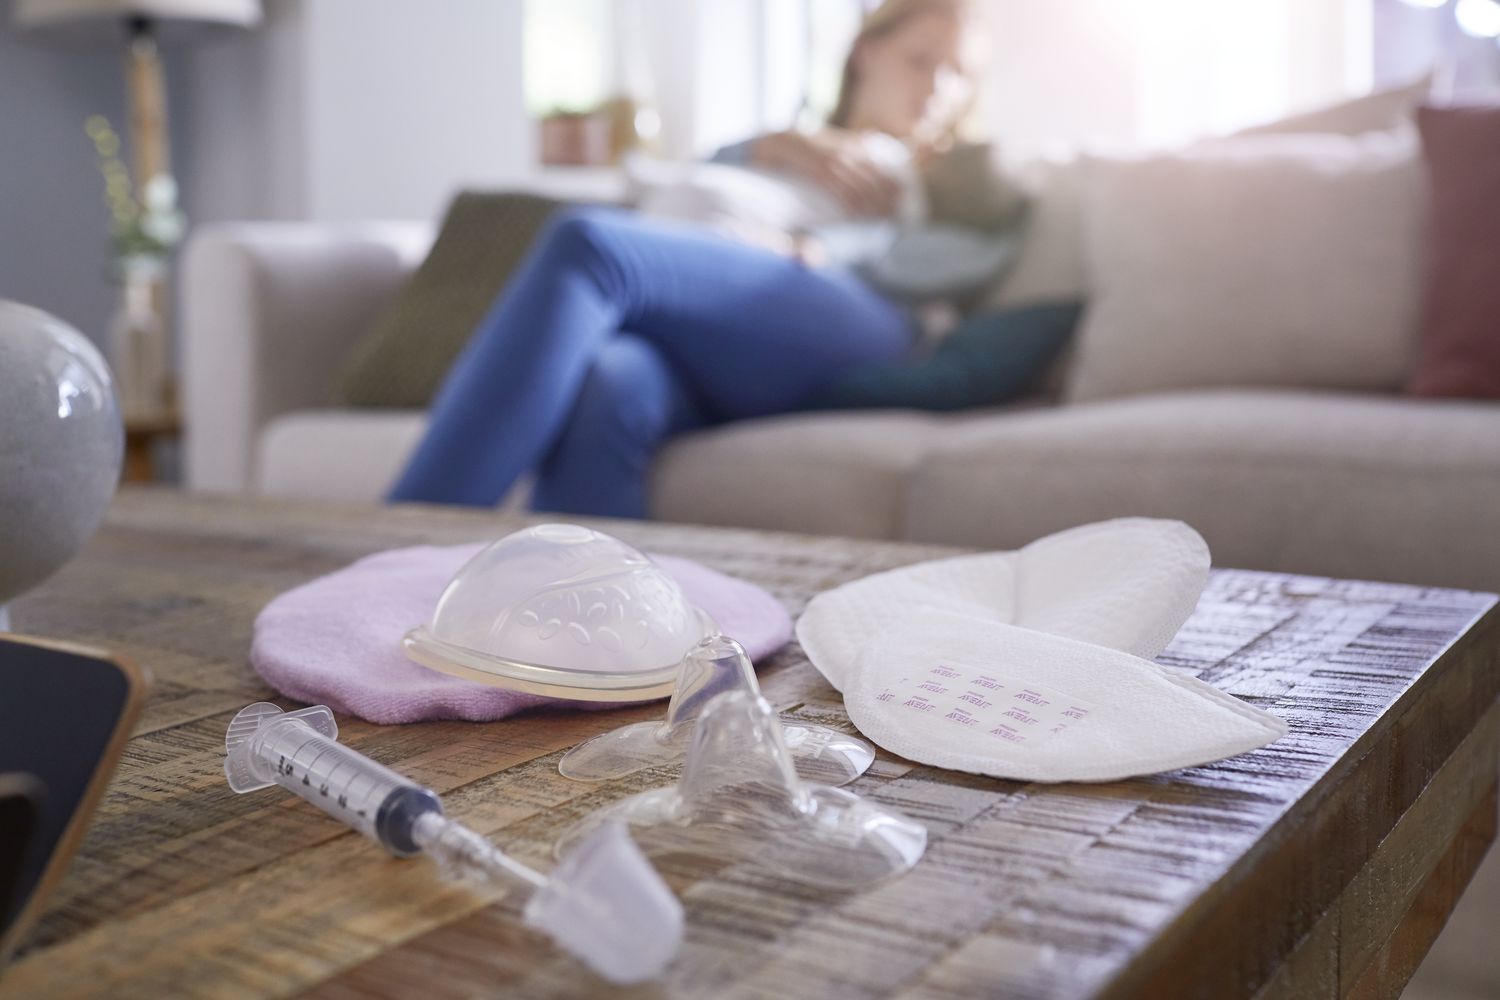 Philips Avent Disposable Breast Pads x60